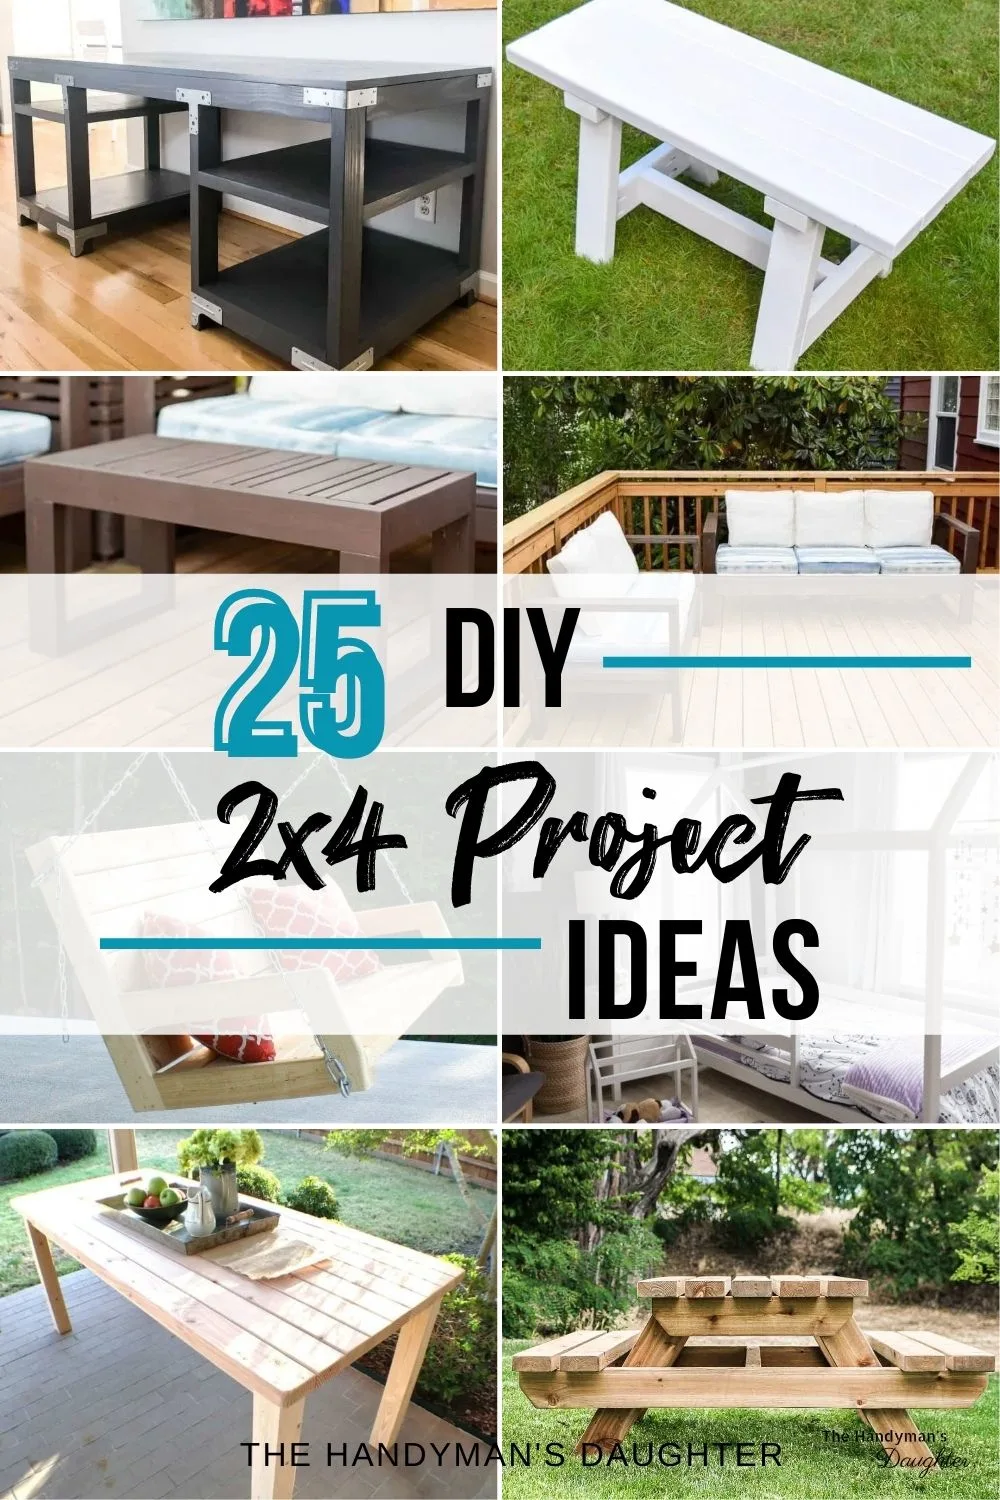 https://www.thehandymansdaughter.com/wp-content/uploads/2022/02/easy-2x4-project-ideas-The-Handymans-Daughter-Pin-1.jpg.webp